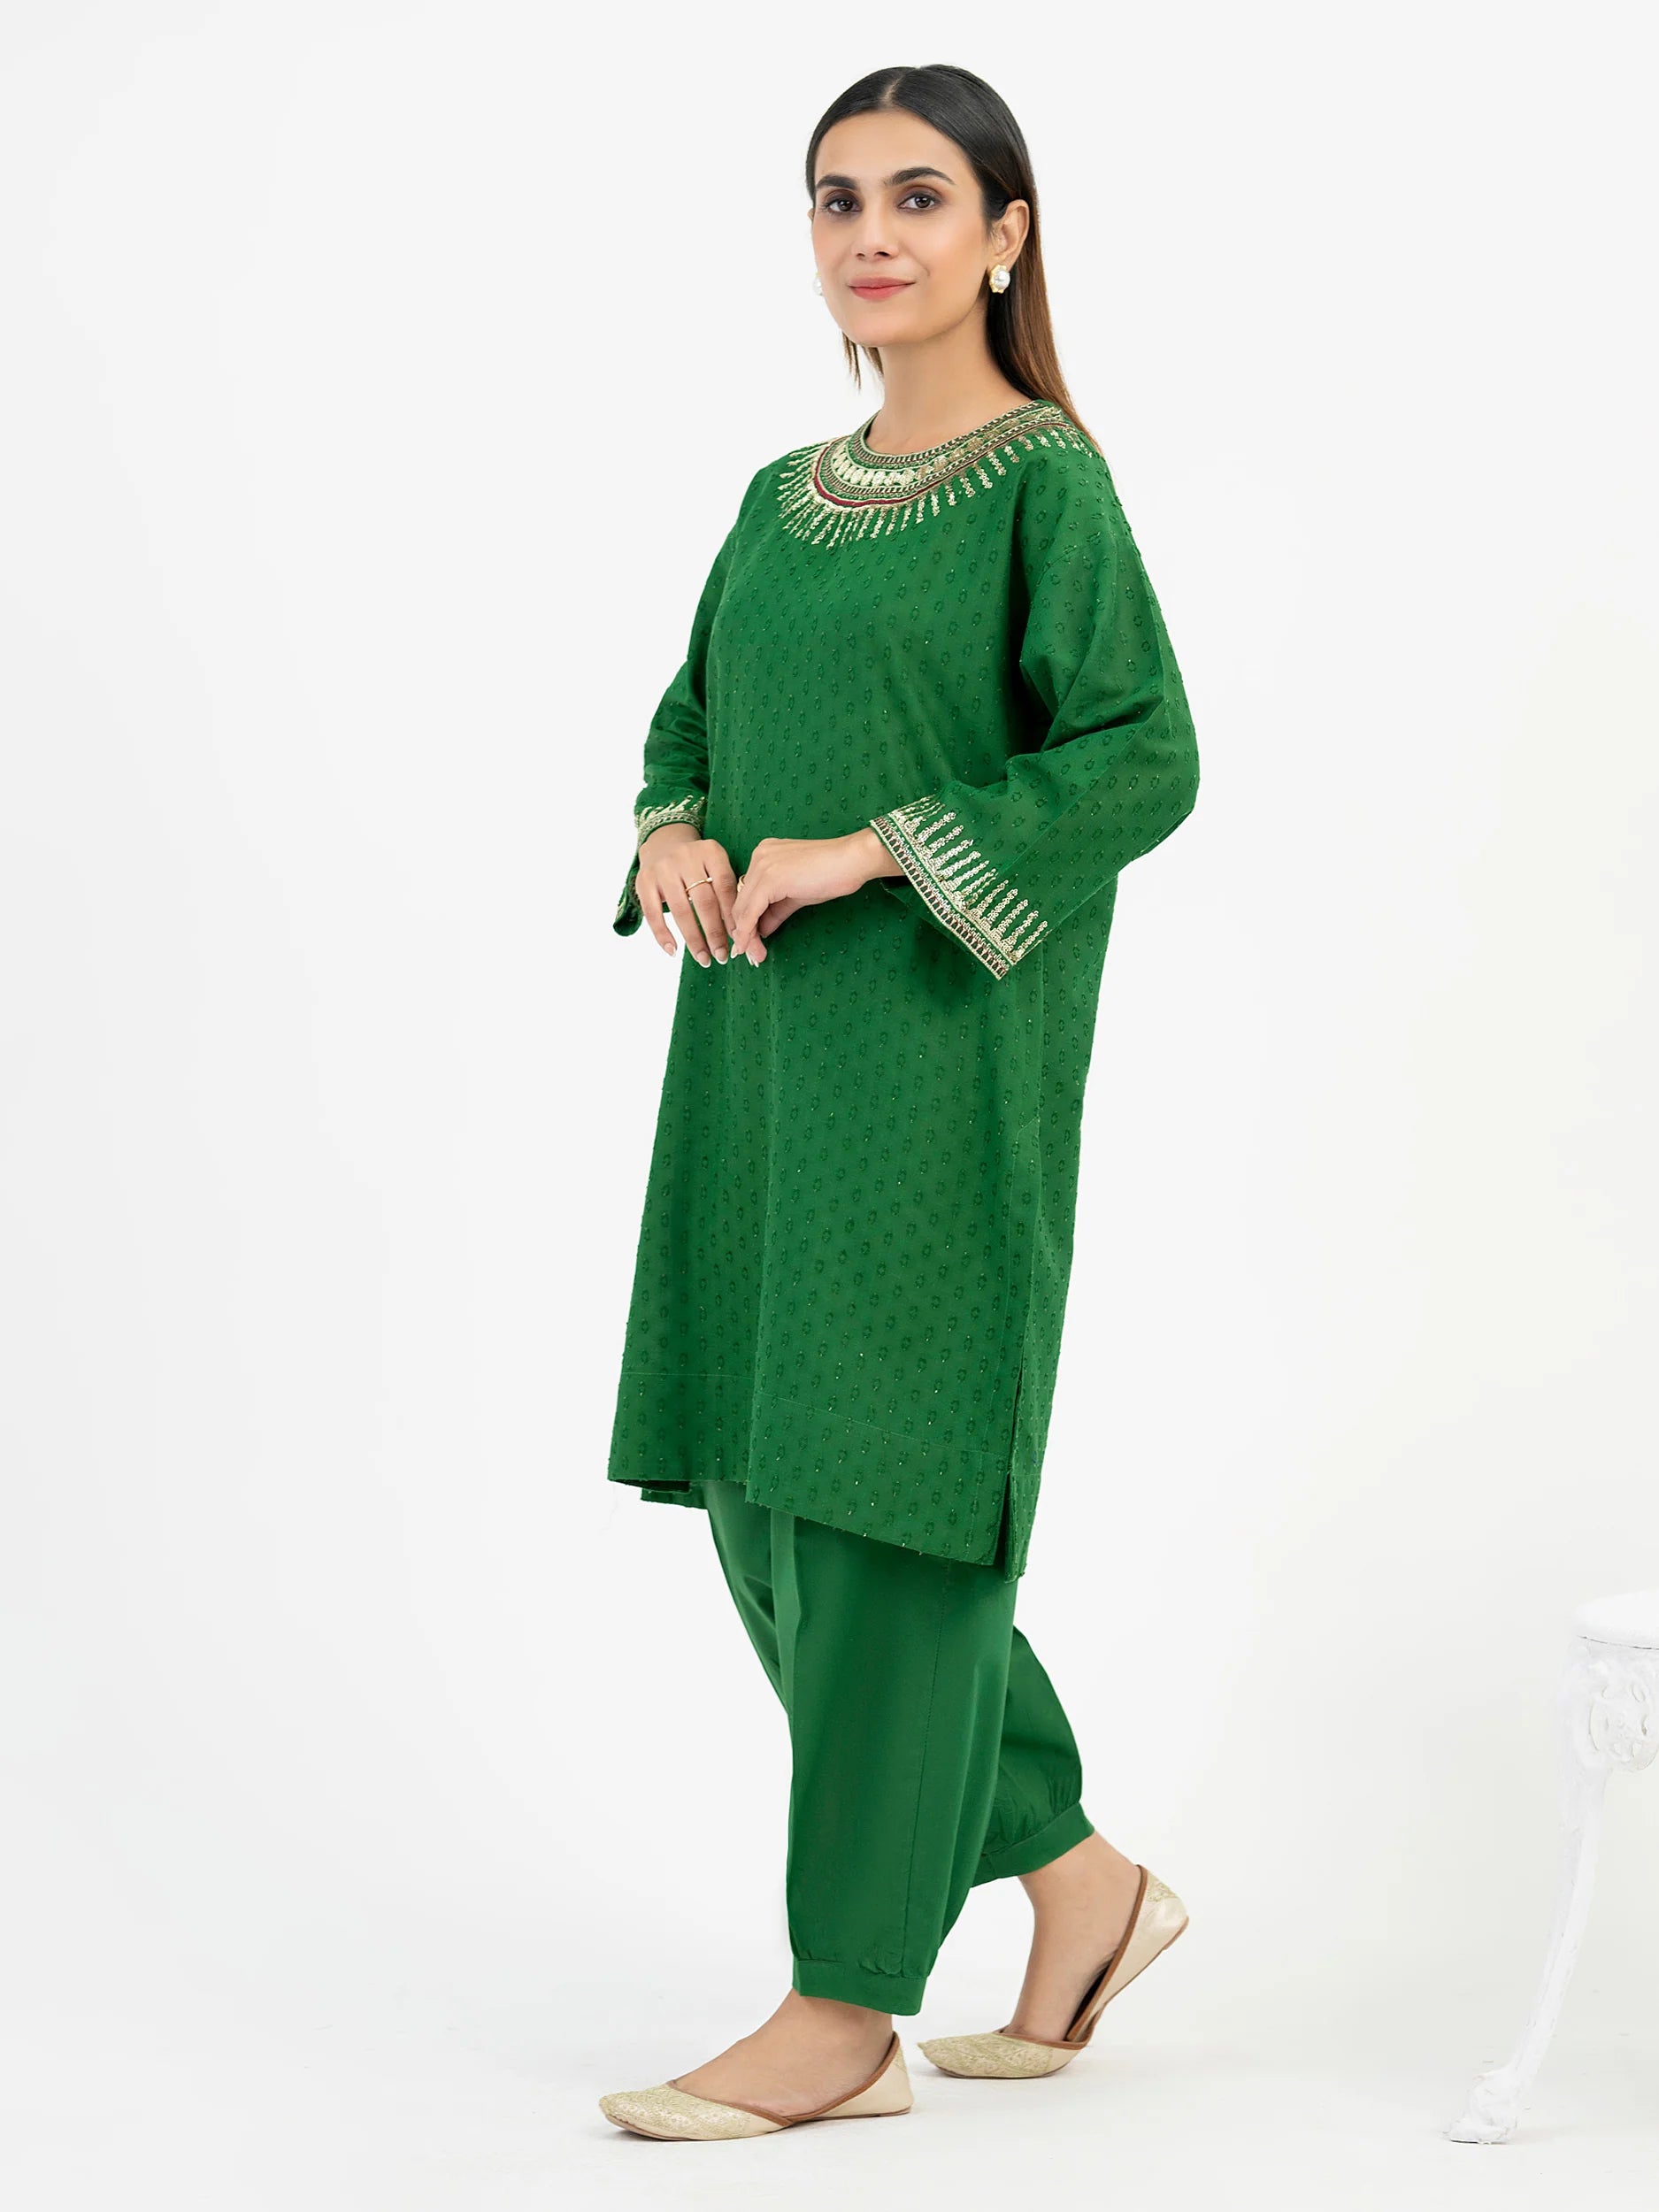 Lime Light Embroidered Jacquard 2 Piece Suit LM-10